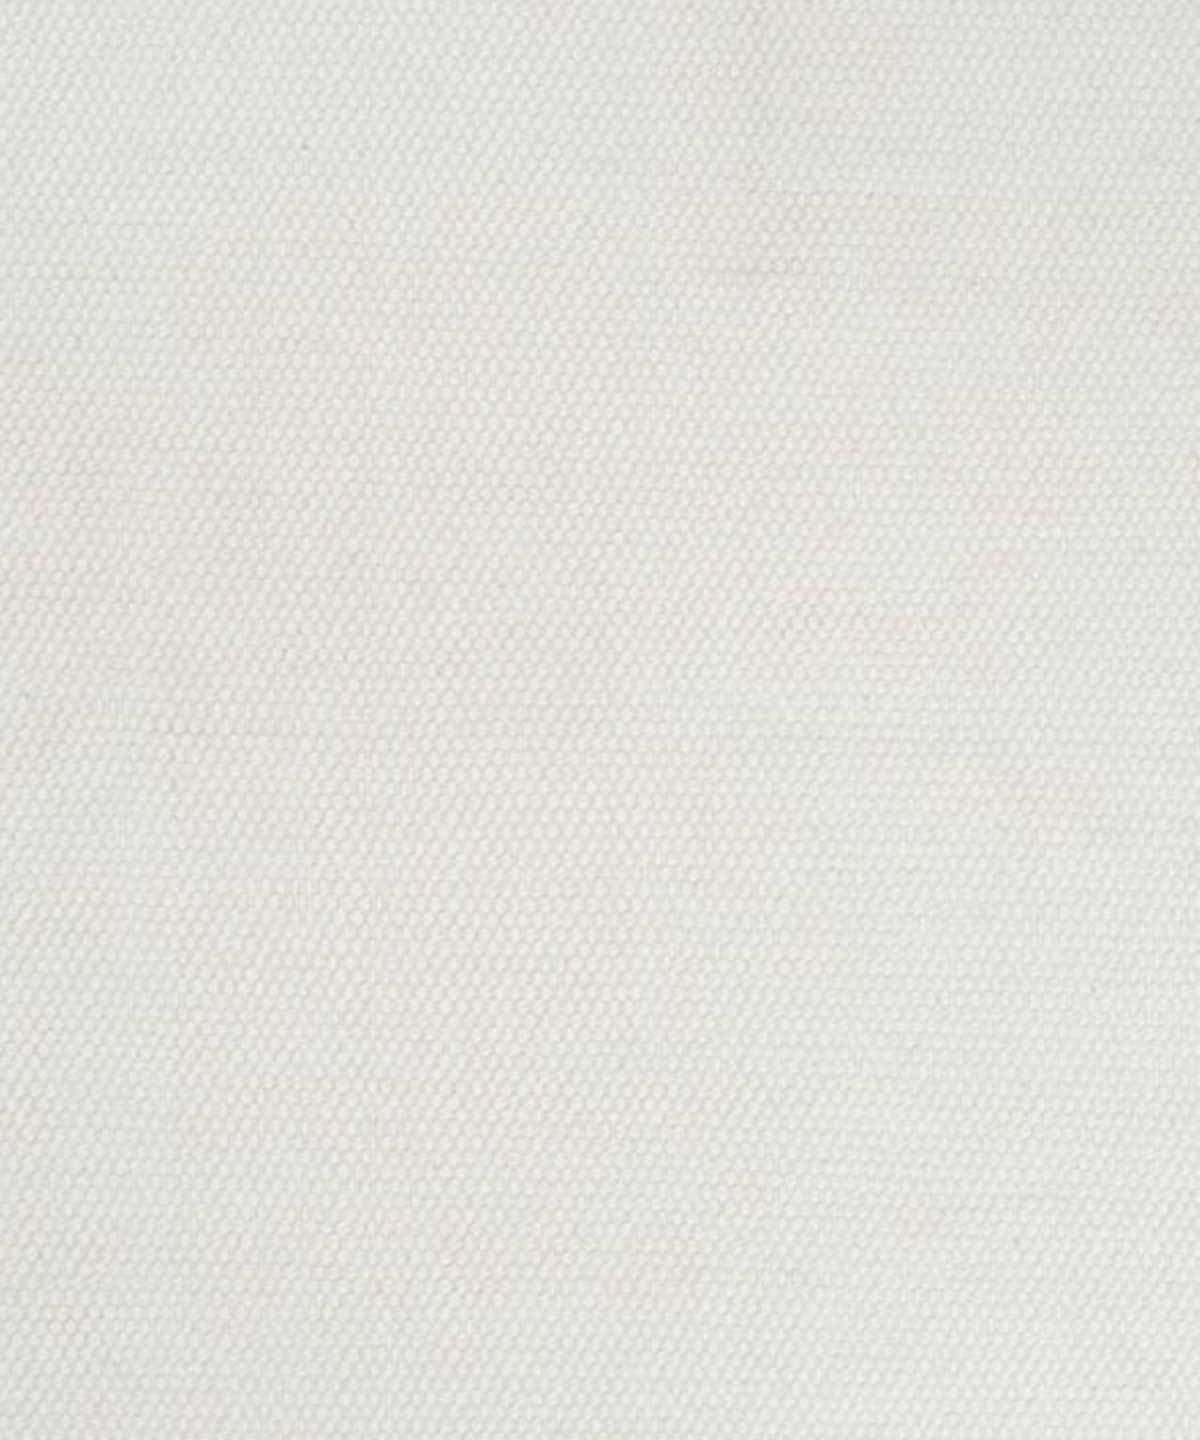 Asko Rug in White by Loloi | TRNK